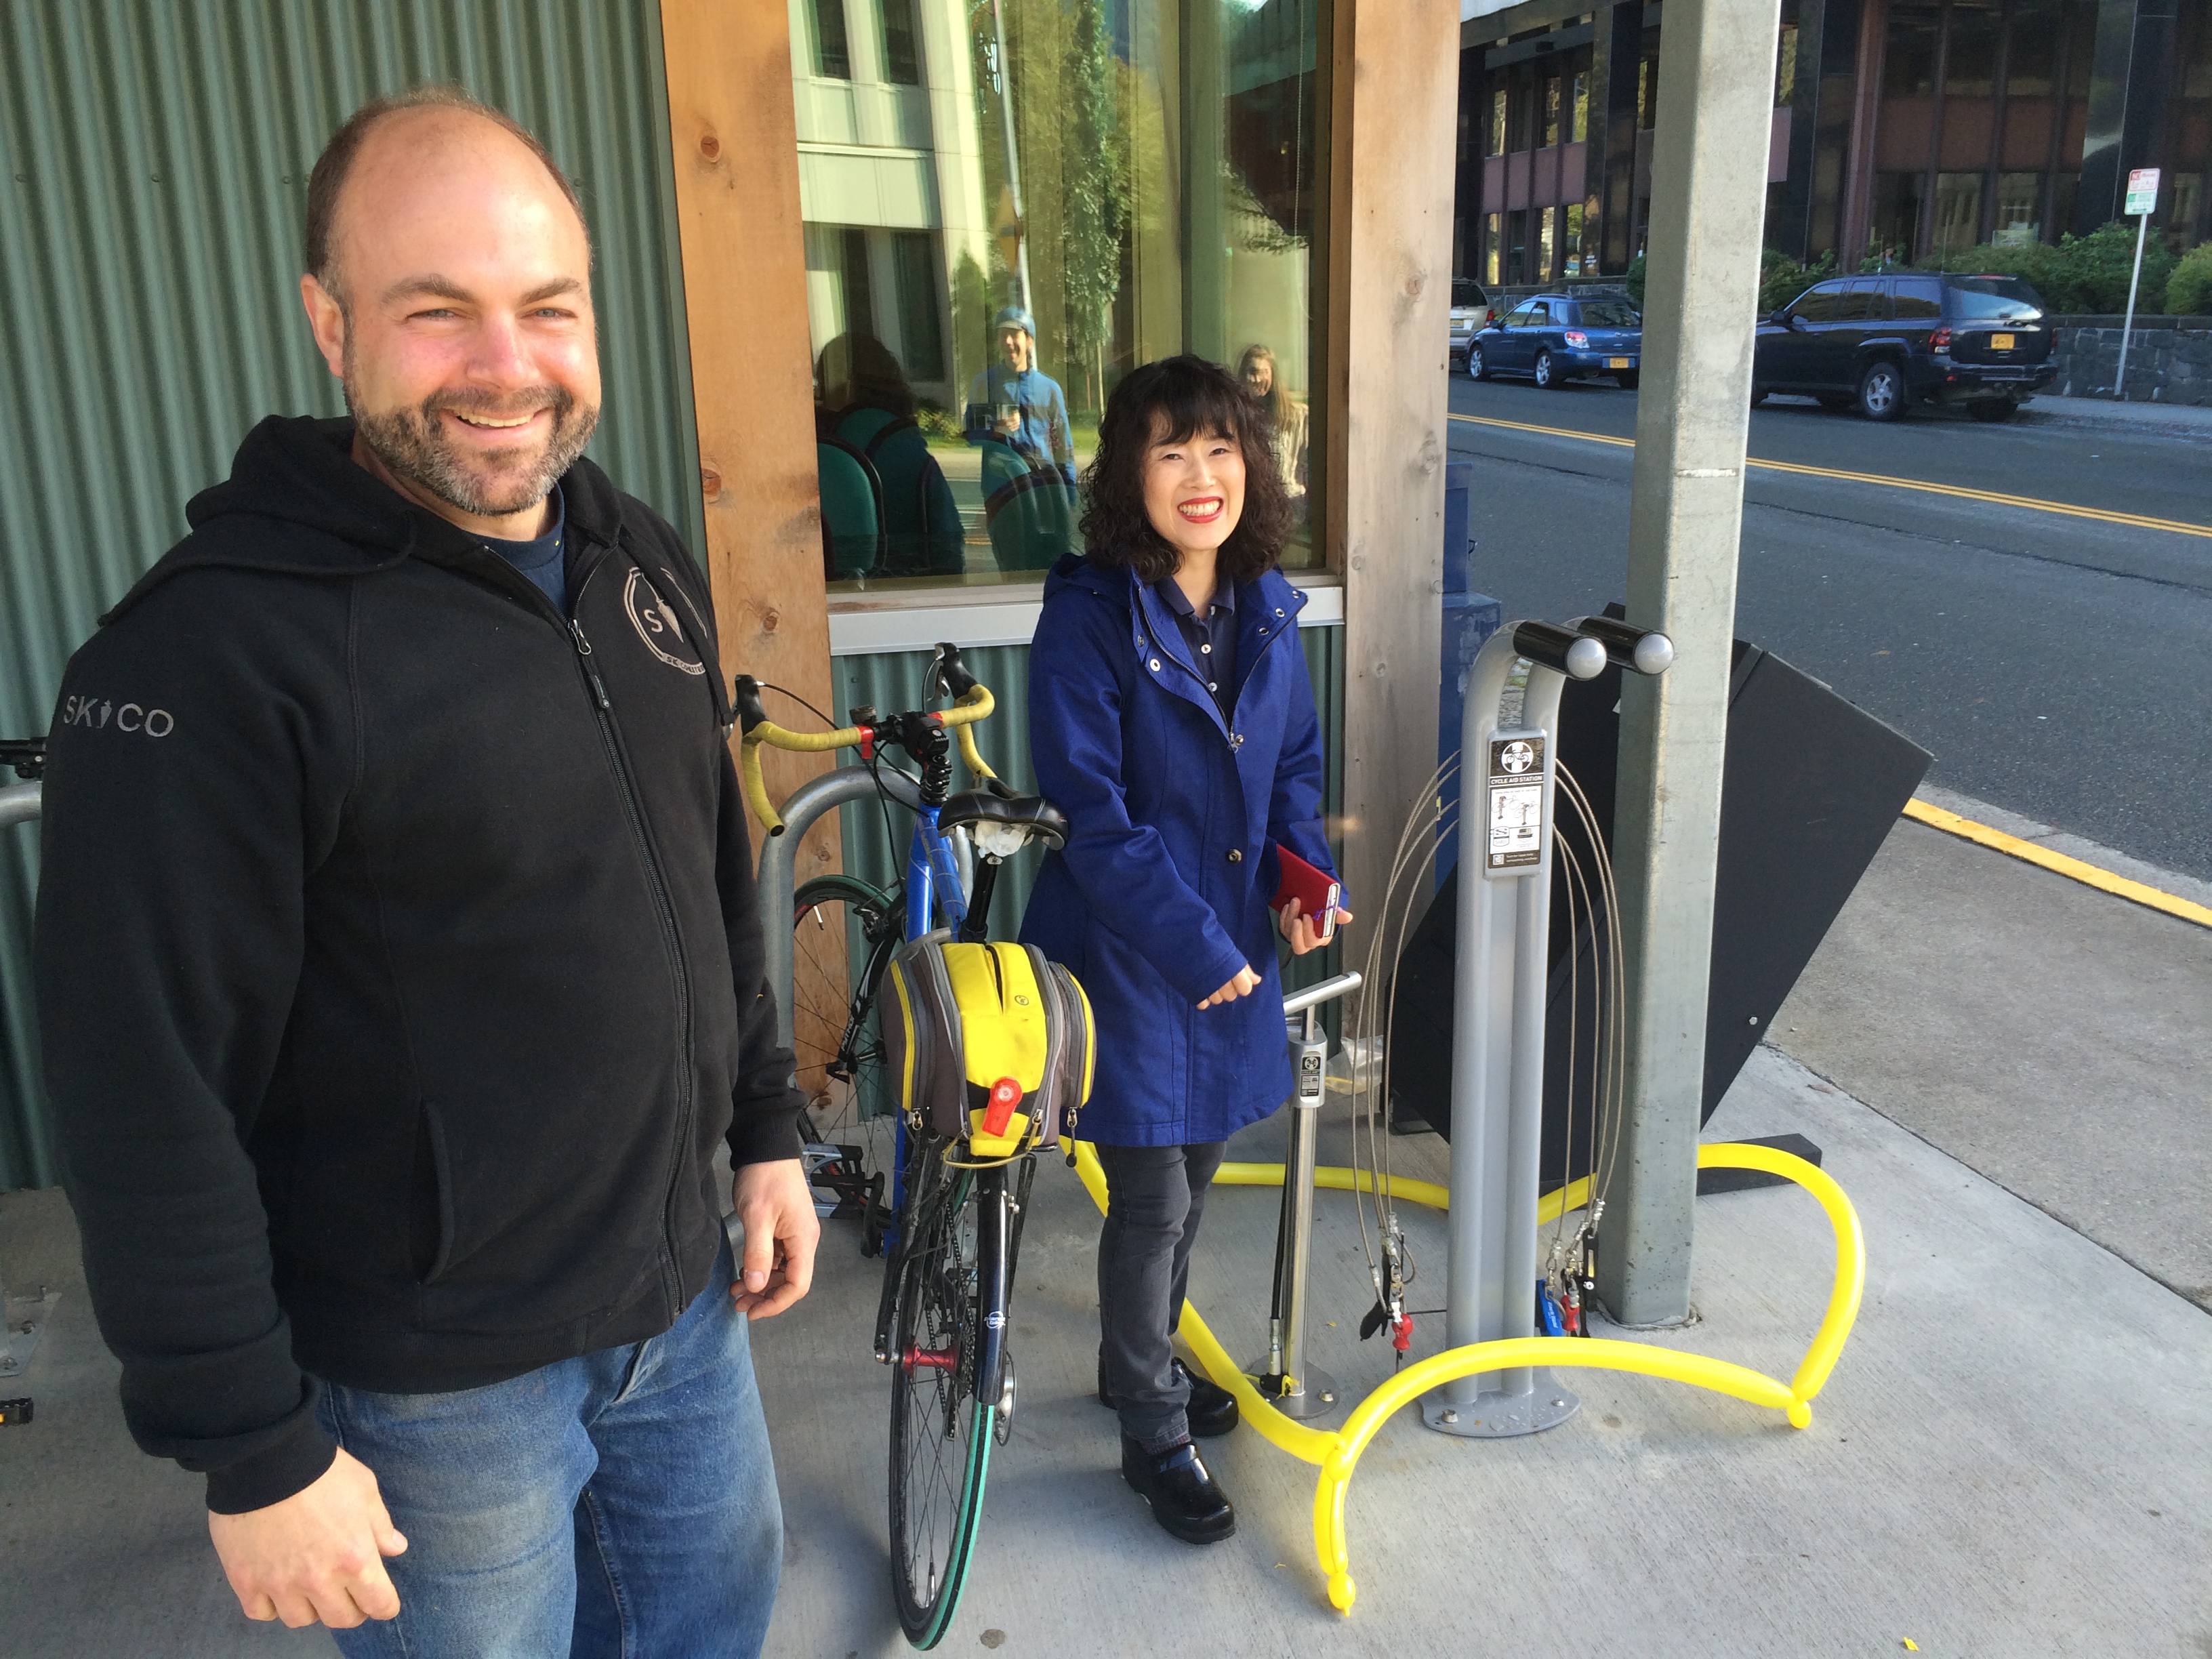 Instead of a ribbon cutting, project organizers Marc Wheeler and Jeong Kim used the new bike station's pump to pop a balloon. (Photo by Scott Burton/KTOO)